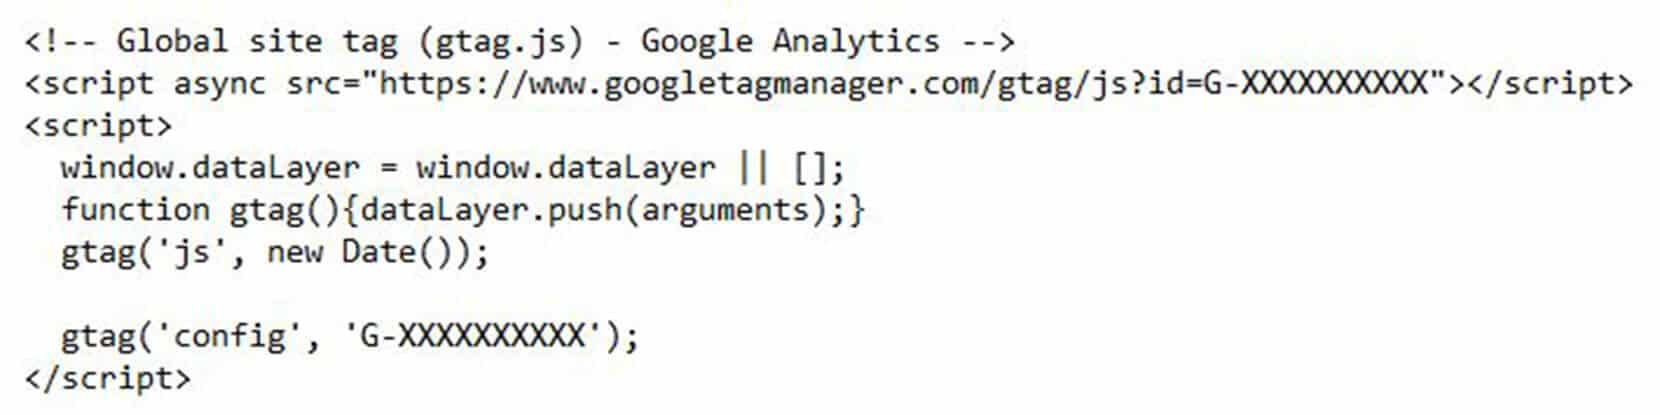 google-analytics-4-code-global-site-tag-snippet